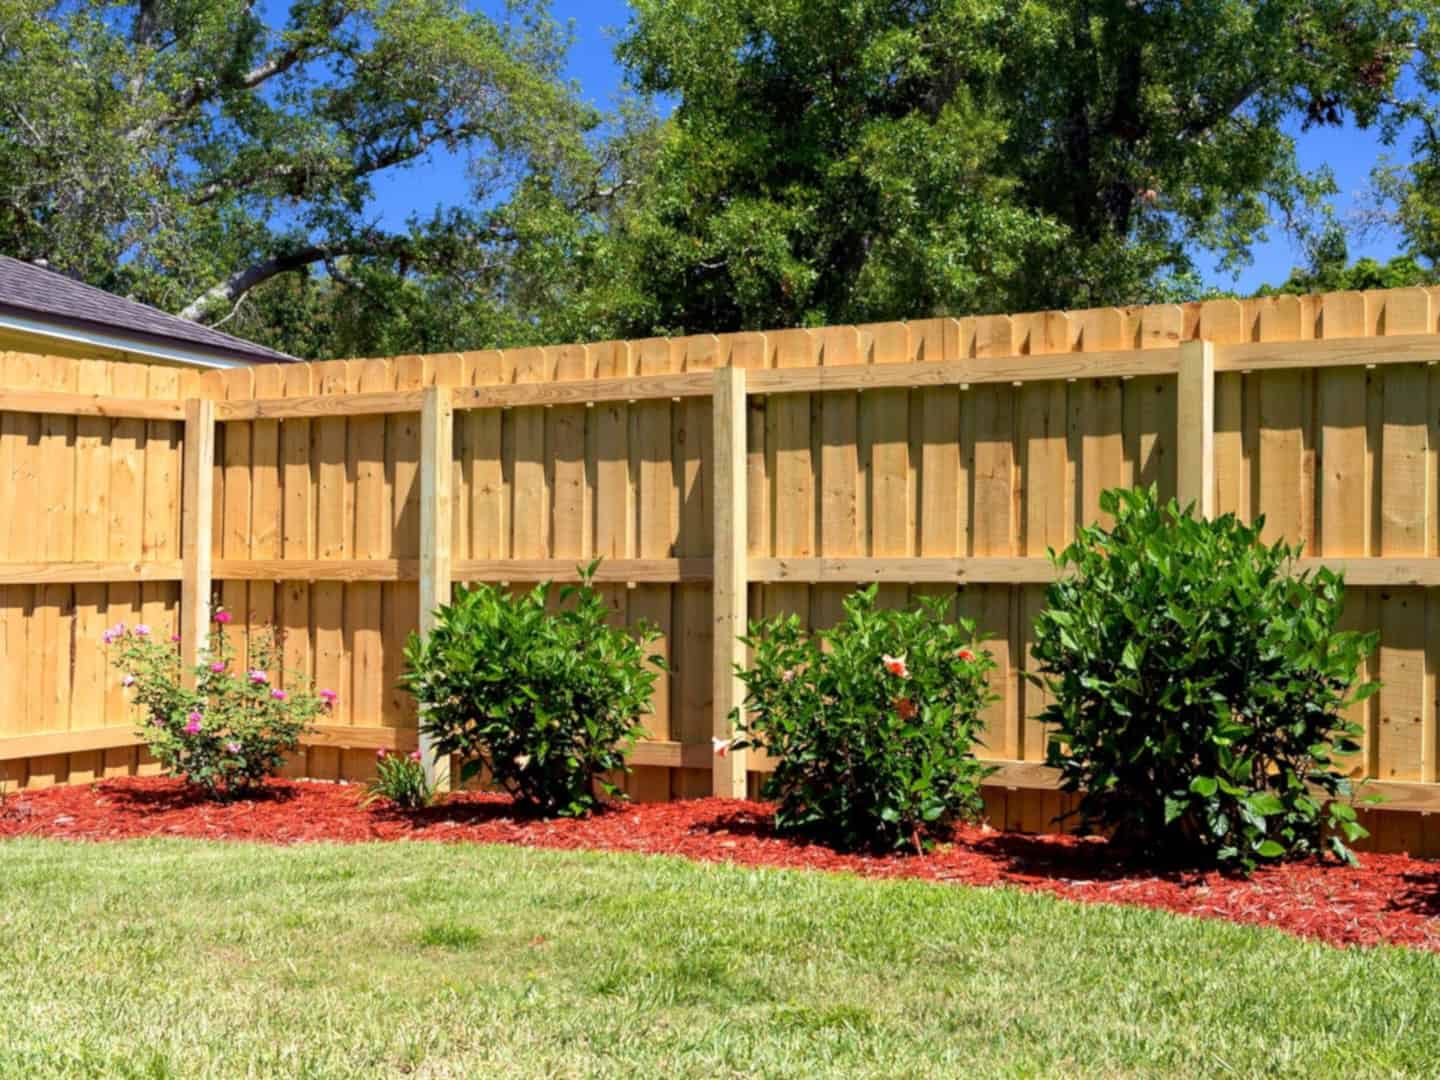 Featured Fence Installation: Spencer B. from Stockton, CA